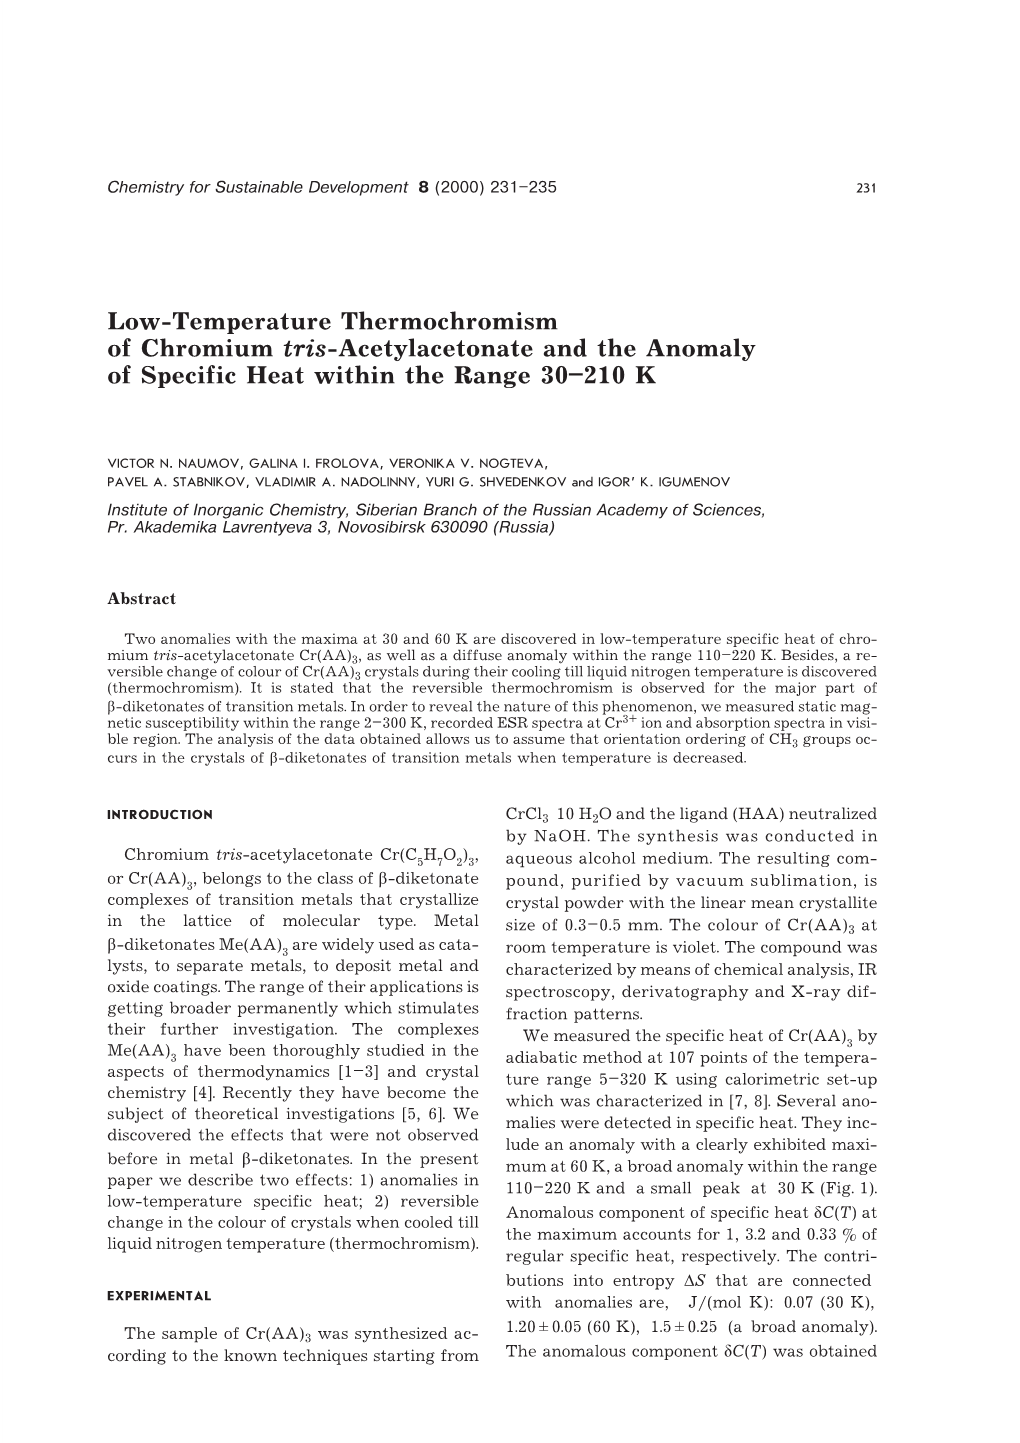 Low-Temperature Thermochromism of Chromium Tris-Acetylacetonate and the Anomaly of Specific Heat Within the Range 30–210 K